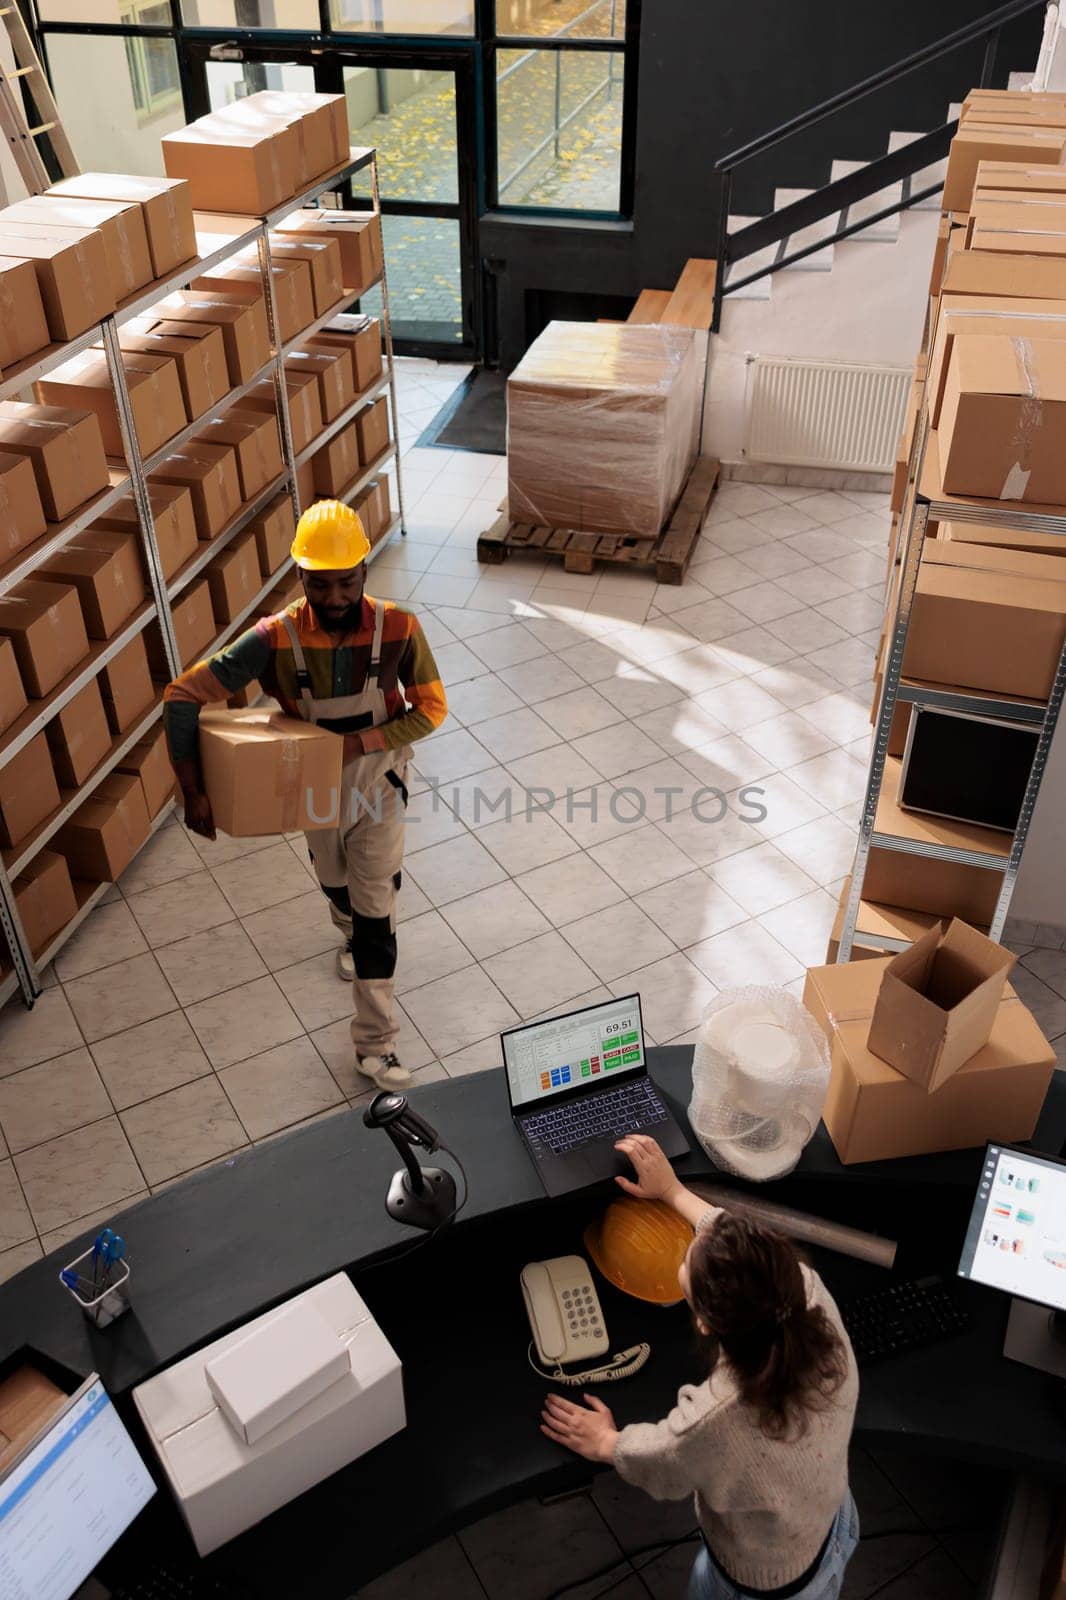 Top view of diverse employee working at products delivery in warehouse, preparing customers orders. Stockroom workers working at merchandise quality control at counter desk in storehouse